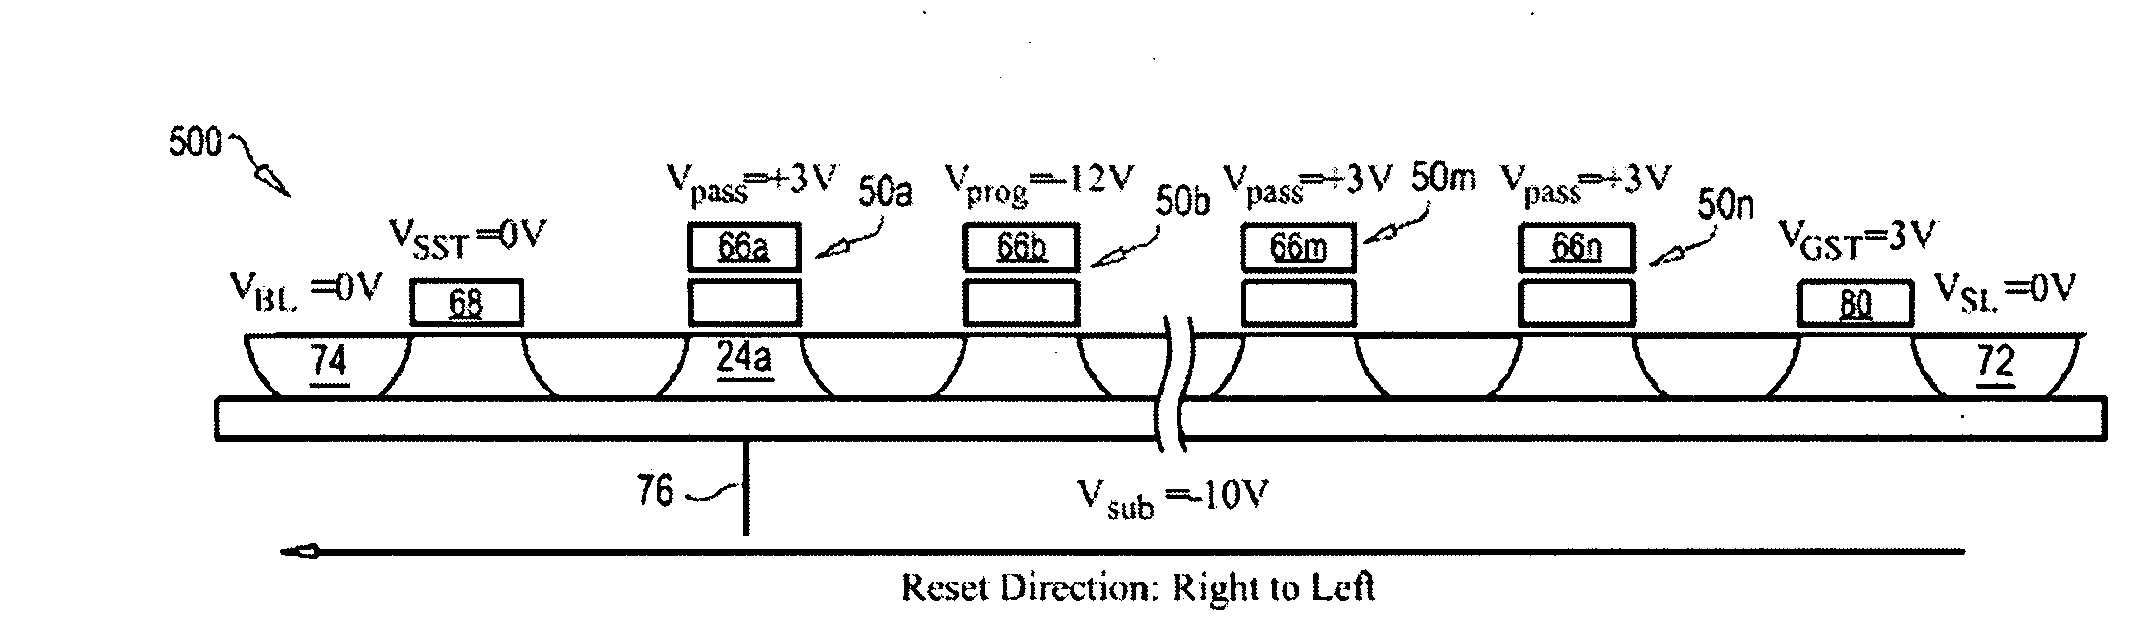 Semiconductor memory having both volatile and non-volatile functionality and method of operating